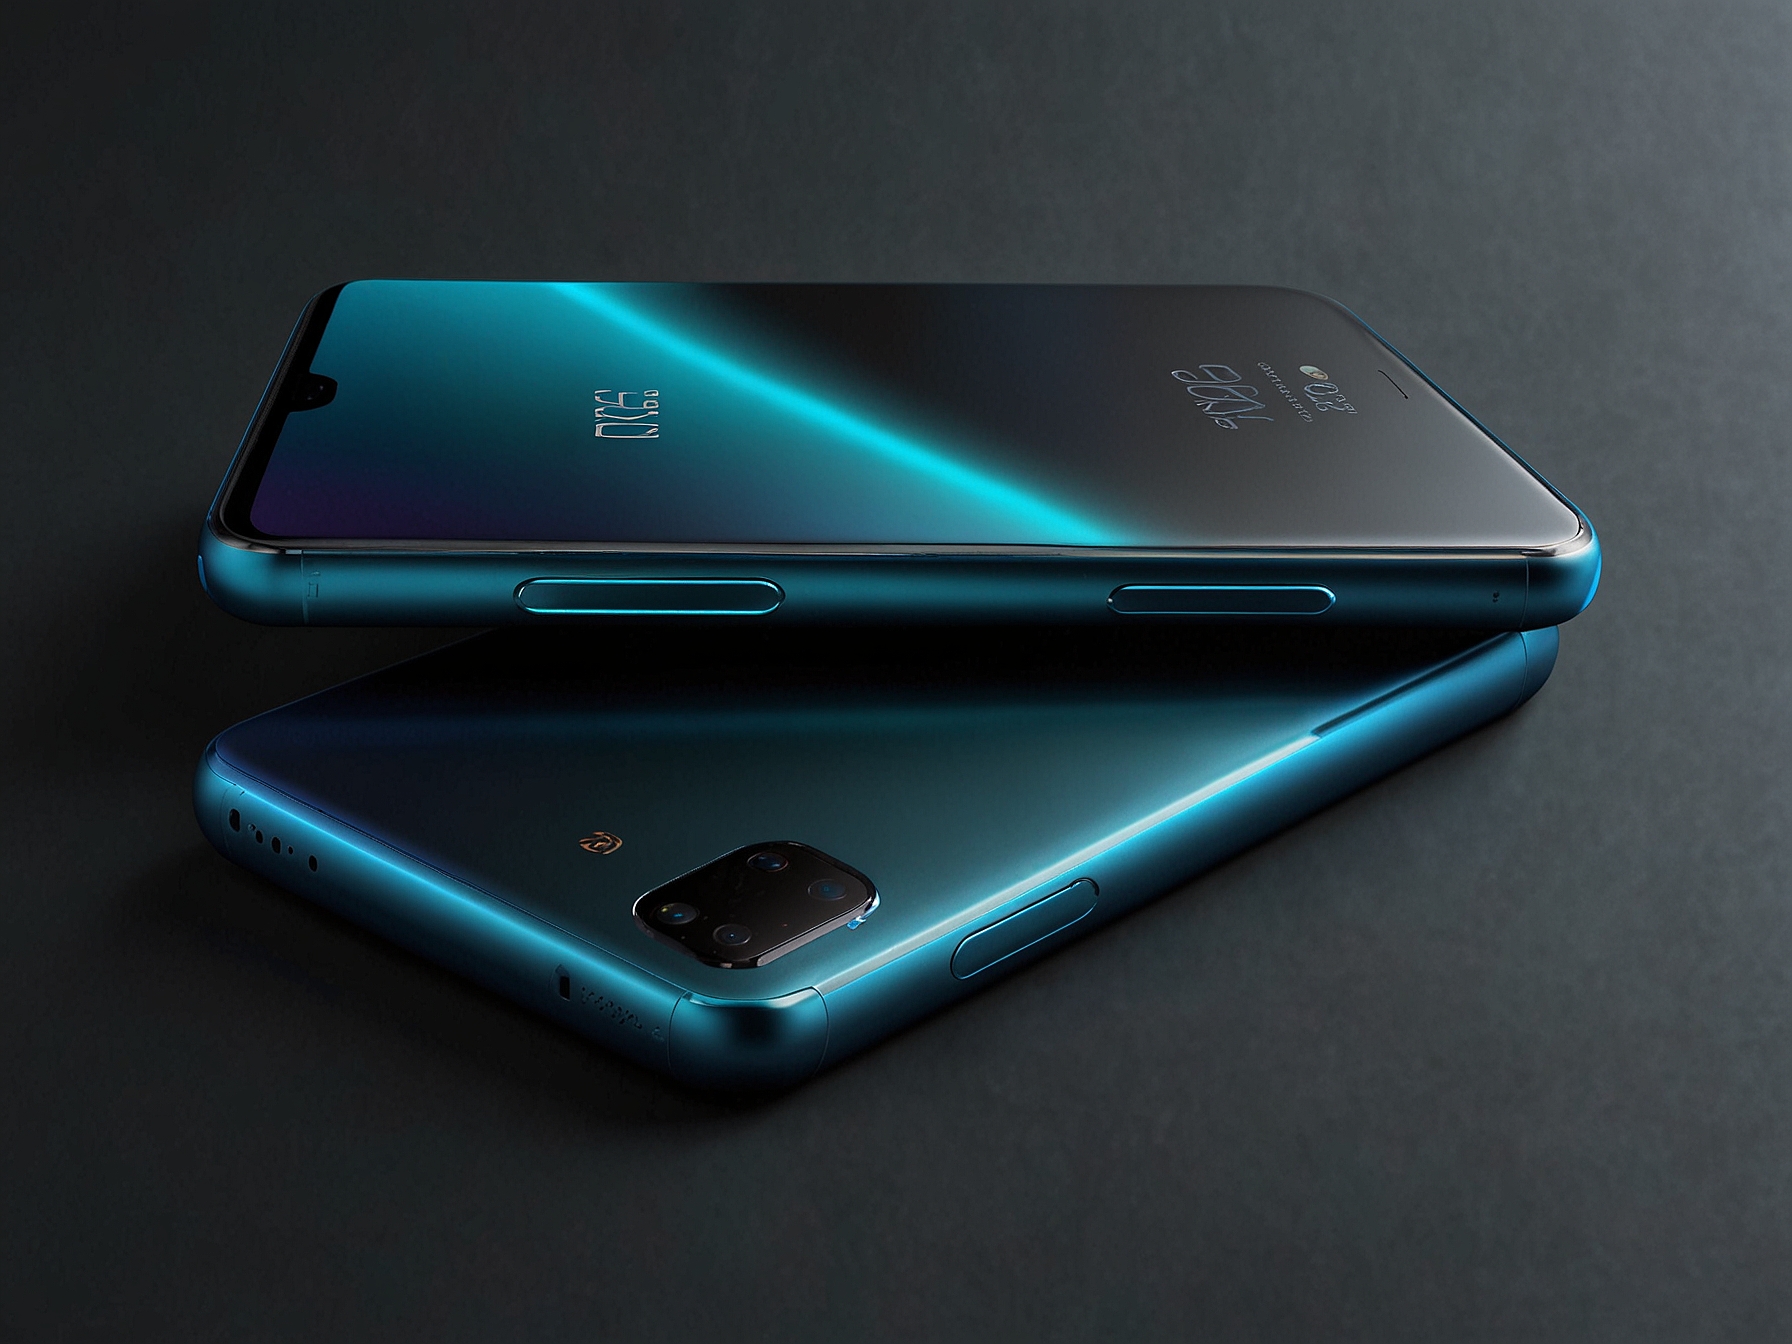 Leaked image of OnePlus Nord CE 4 Lite 5G revealing potential color options in Blue and Black, highlighting the sleek and customizable design of the upcoming smartphone.